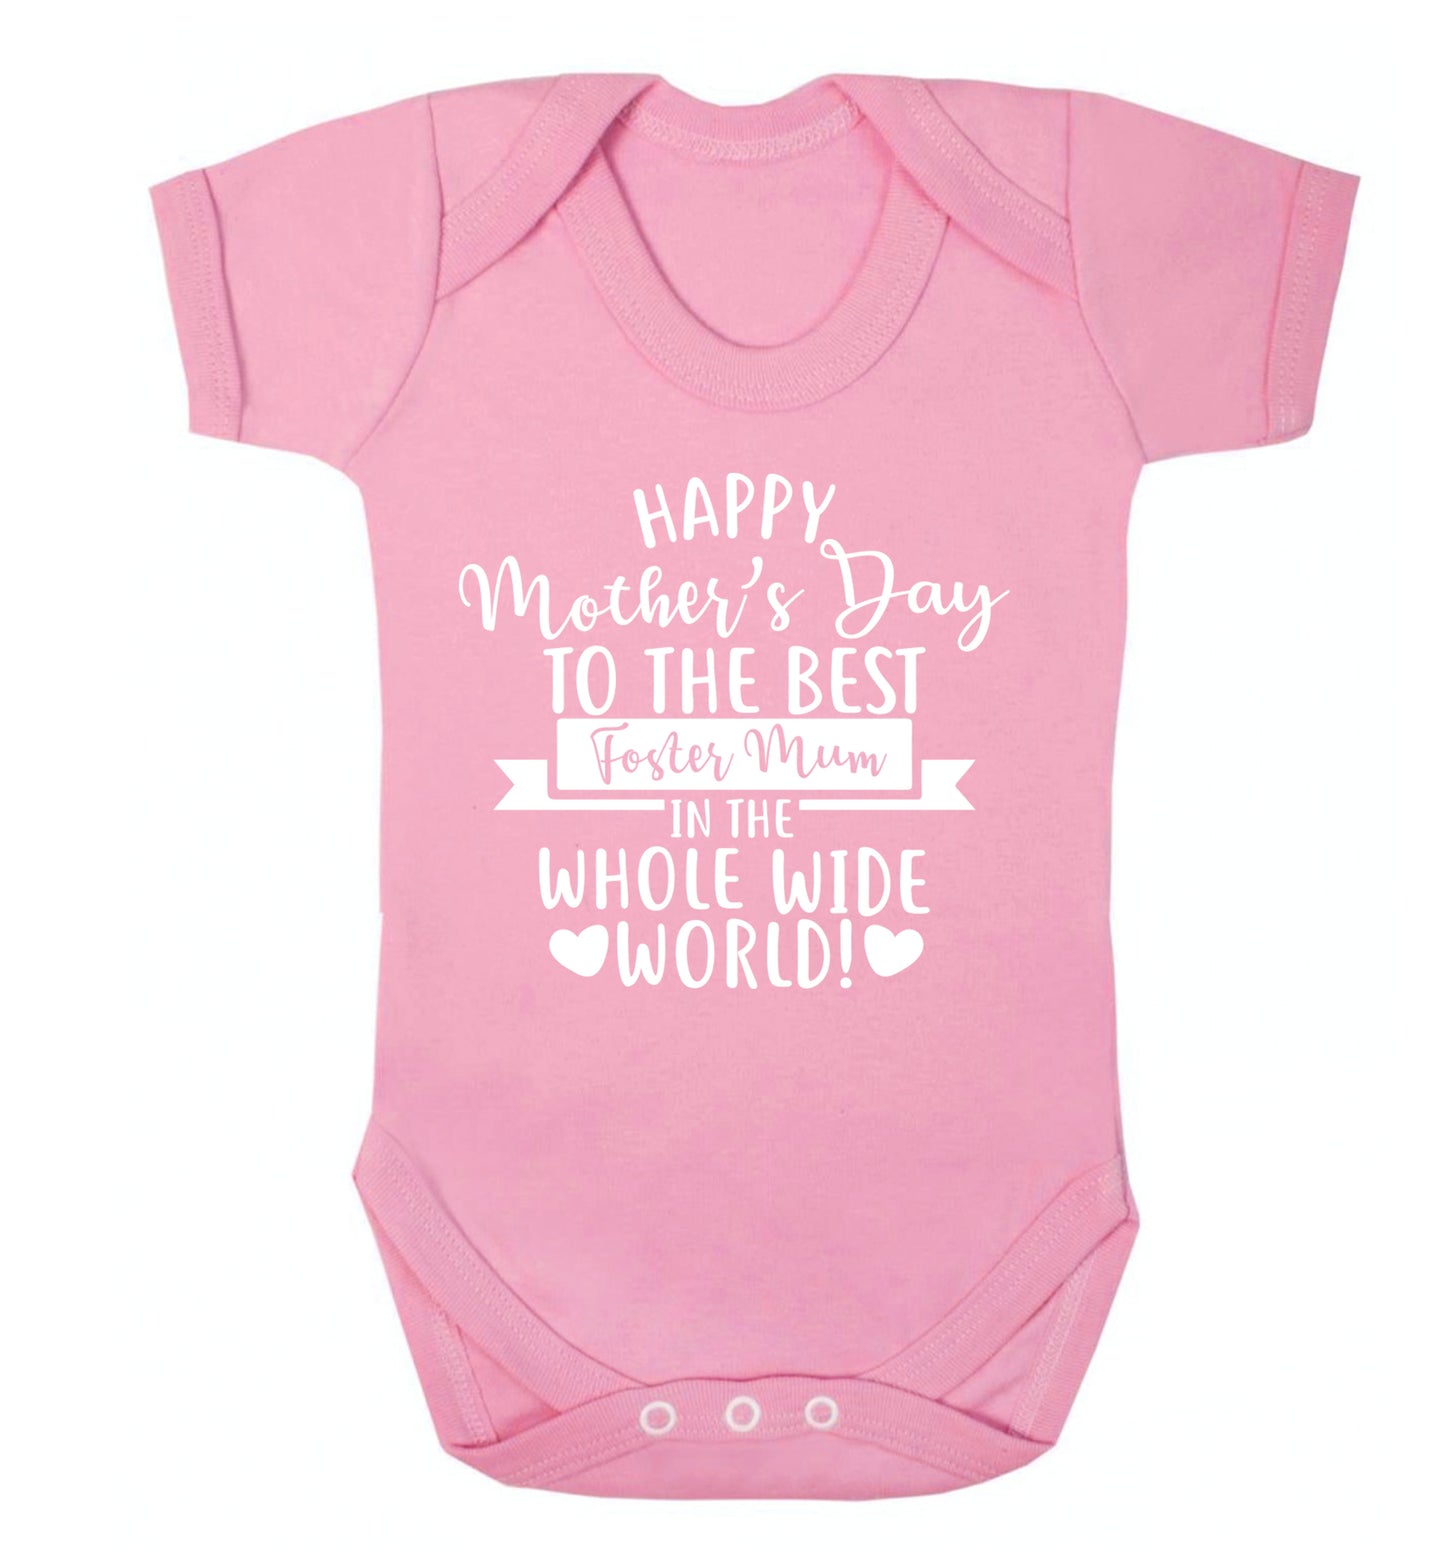 Happy mother's day to the best foster mum in the world Baby Vest pale pink 18-24 months